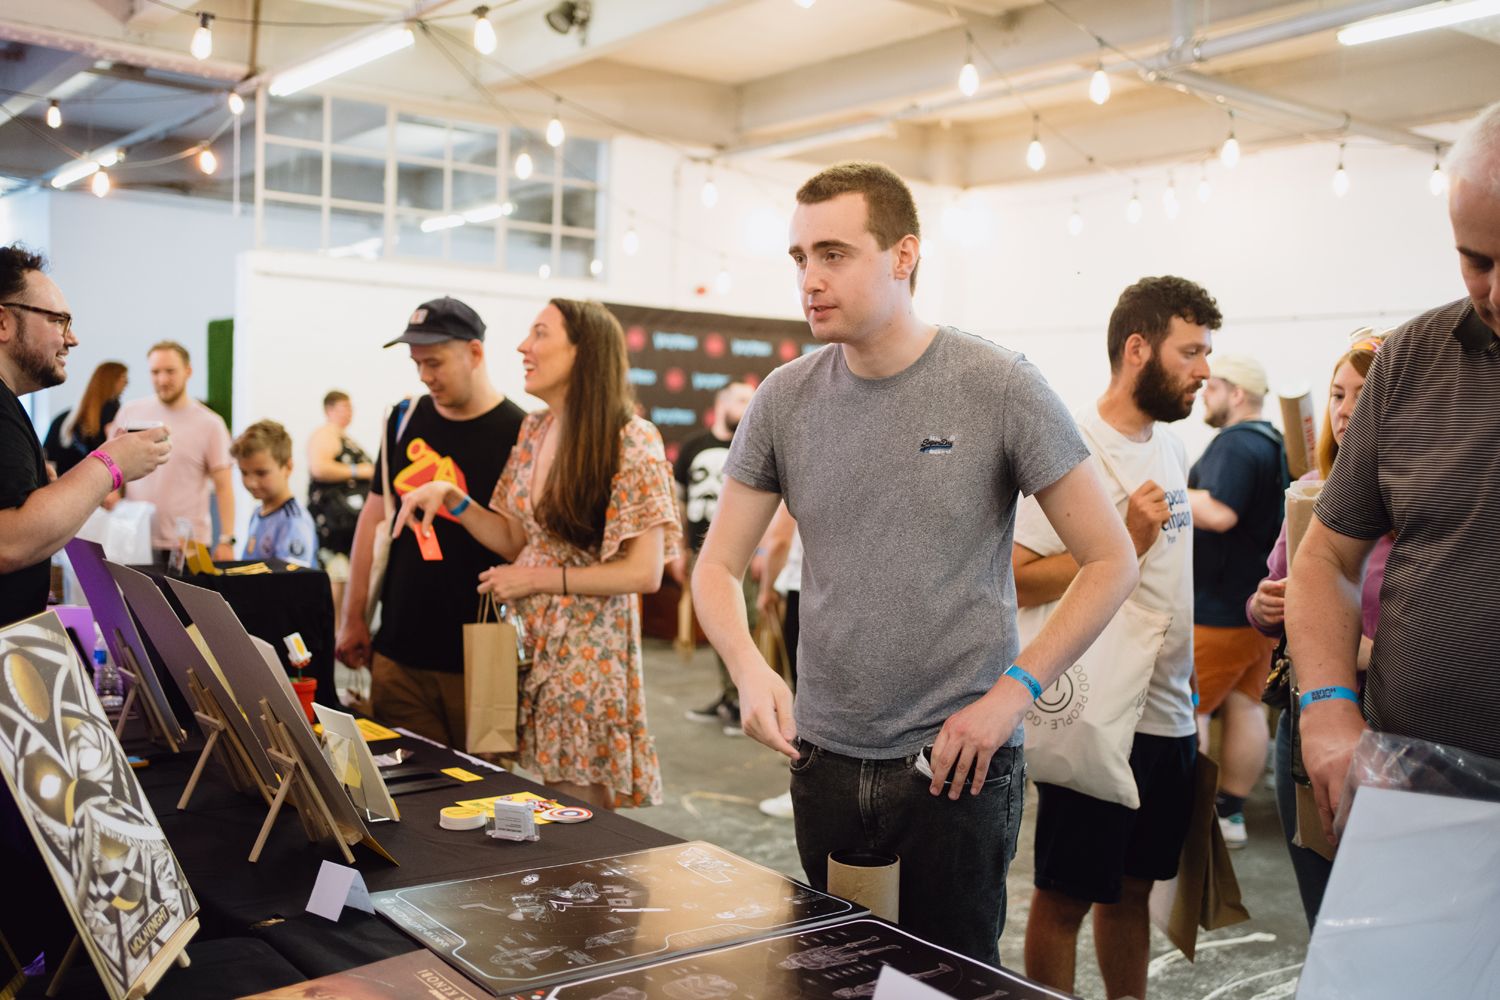 Vice Press Open House – We ABSOLUTELY LOVED it!